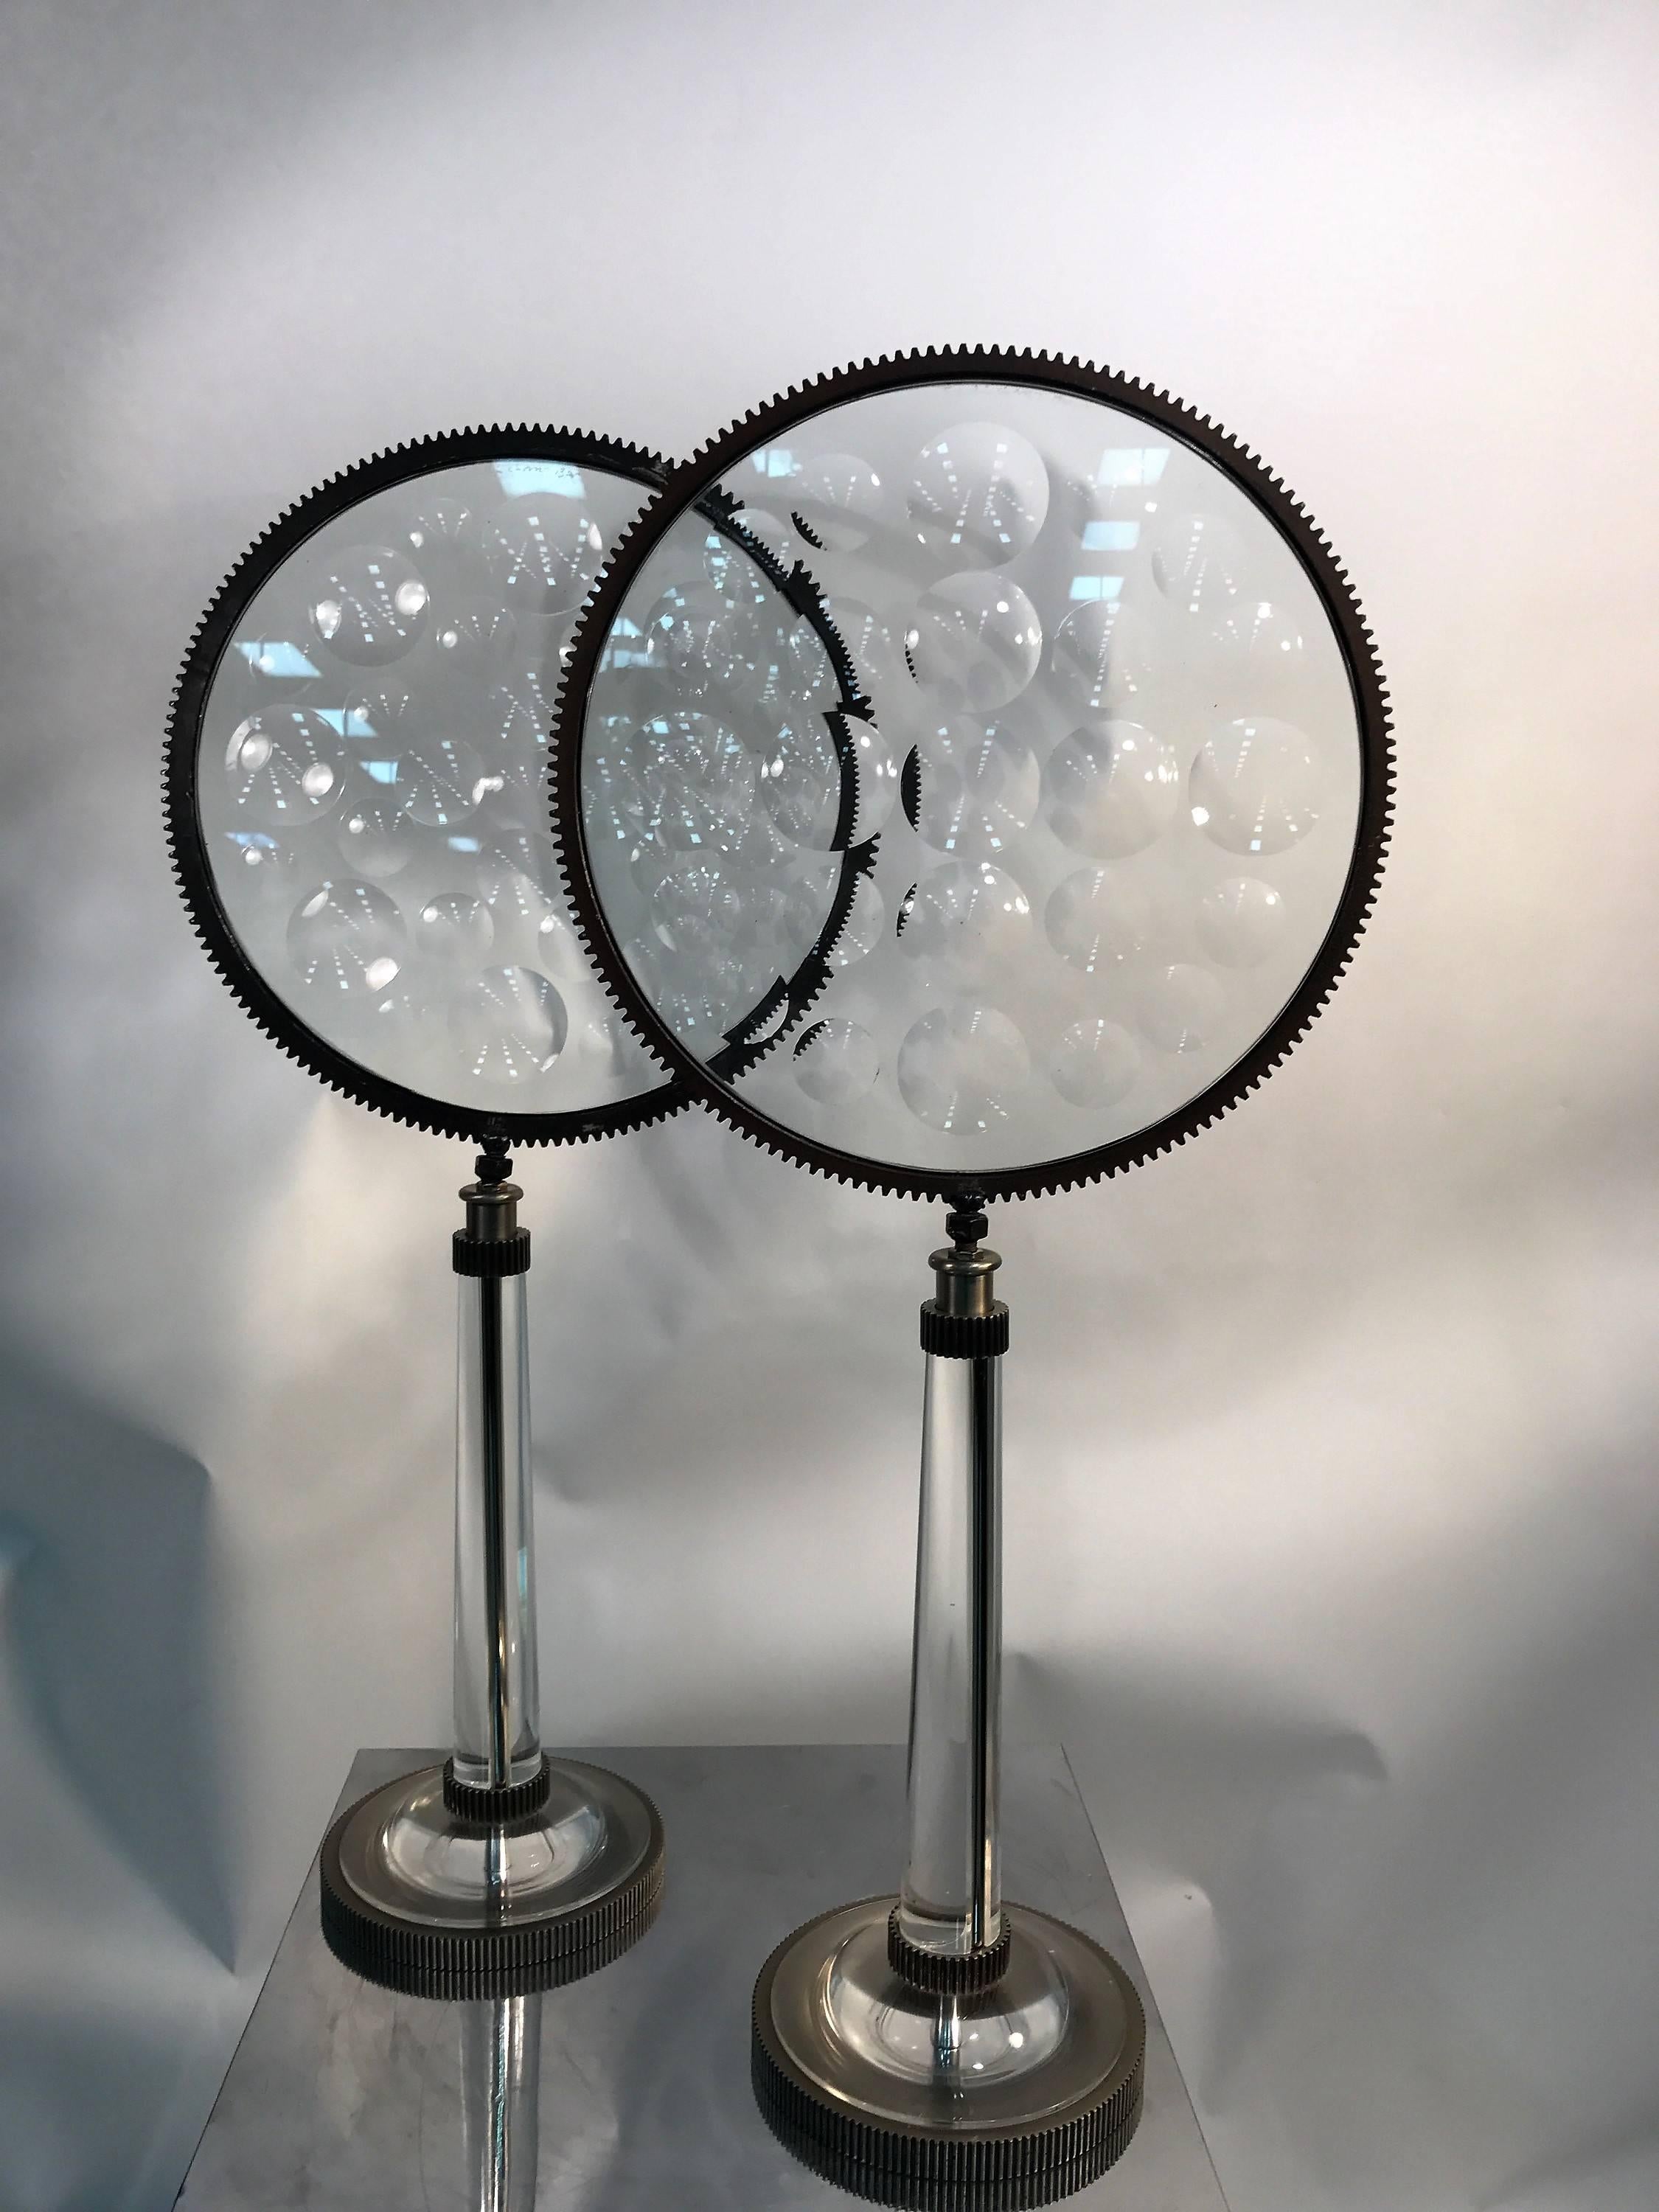 Unusual design with a clear Lucite base and stem mixed with the Industrial metal gears and great glass faces.